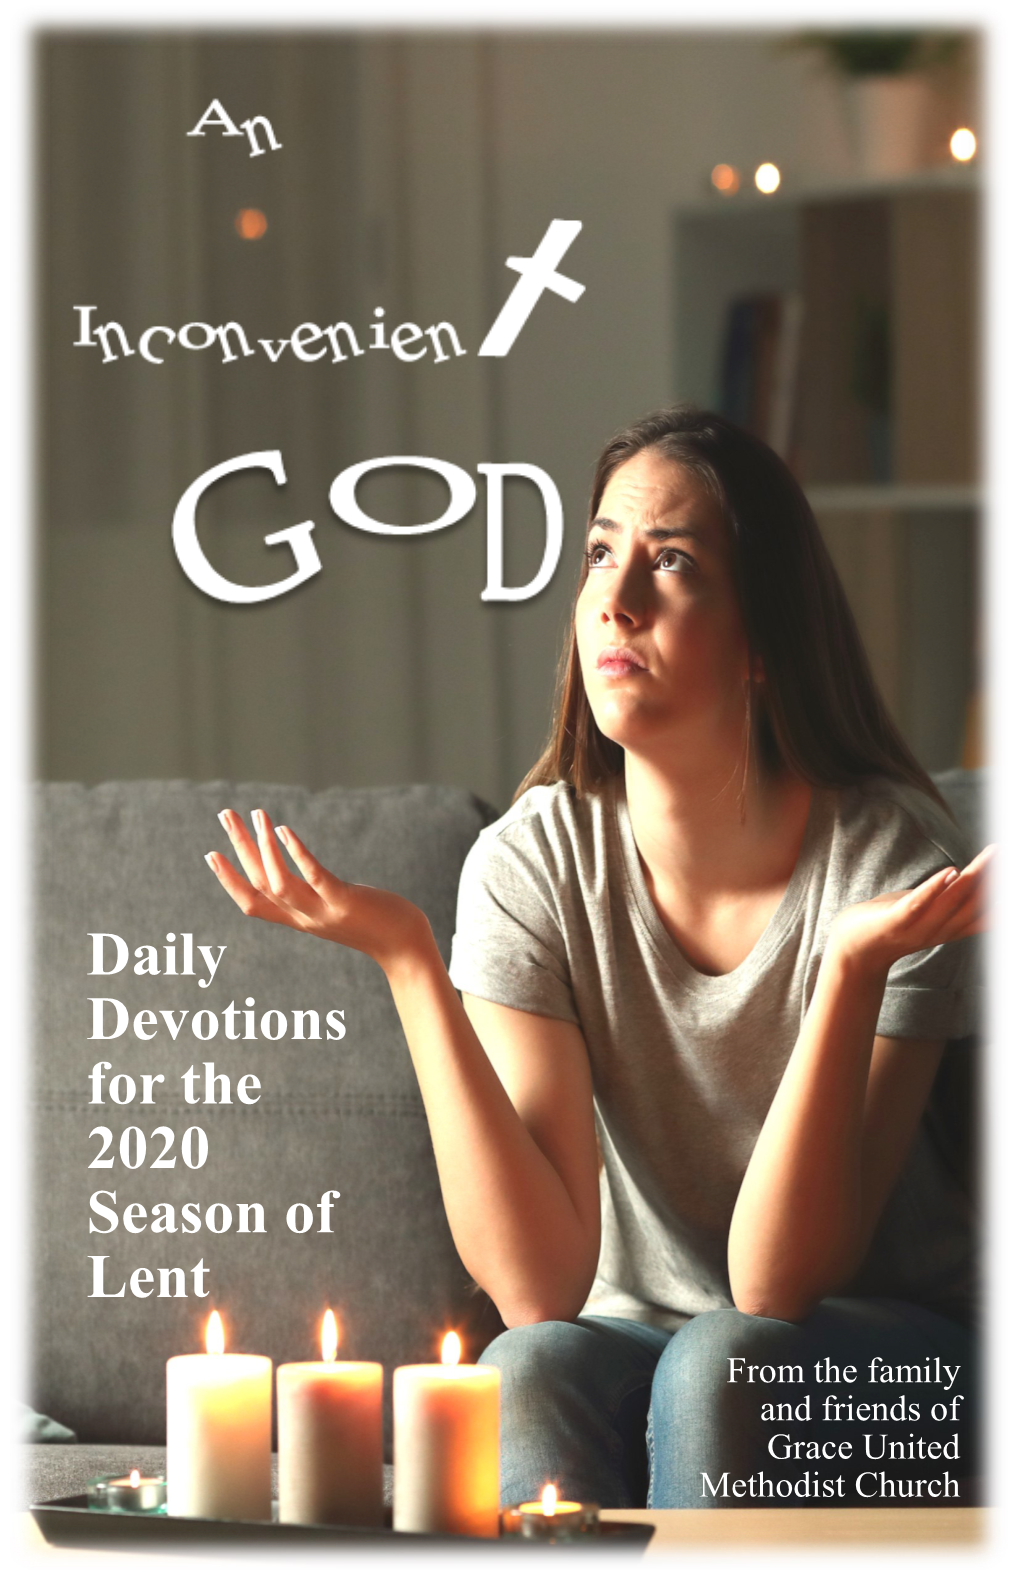 Daily Devotions for the 2020 Season of Lent